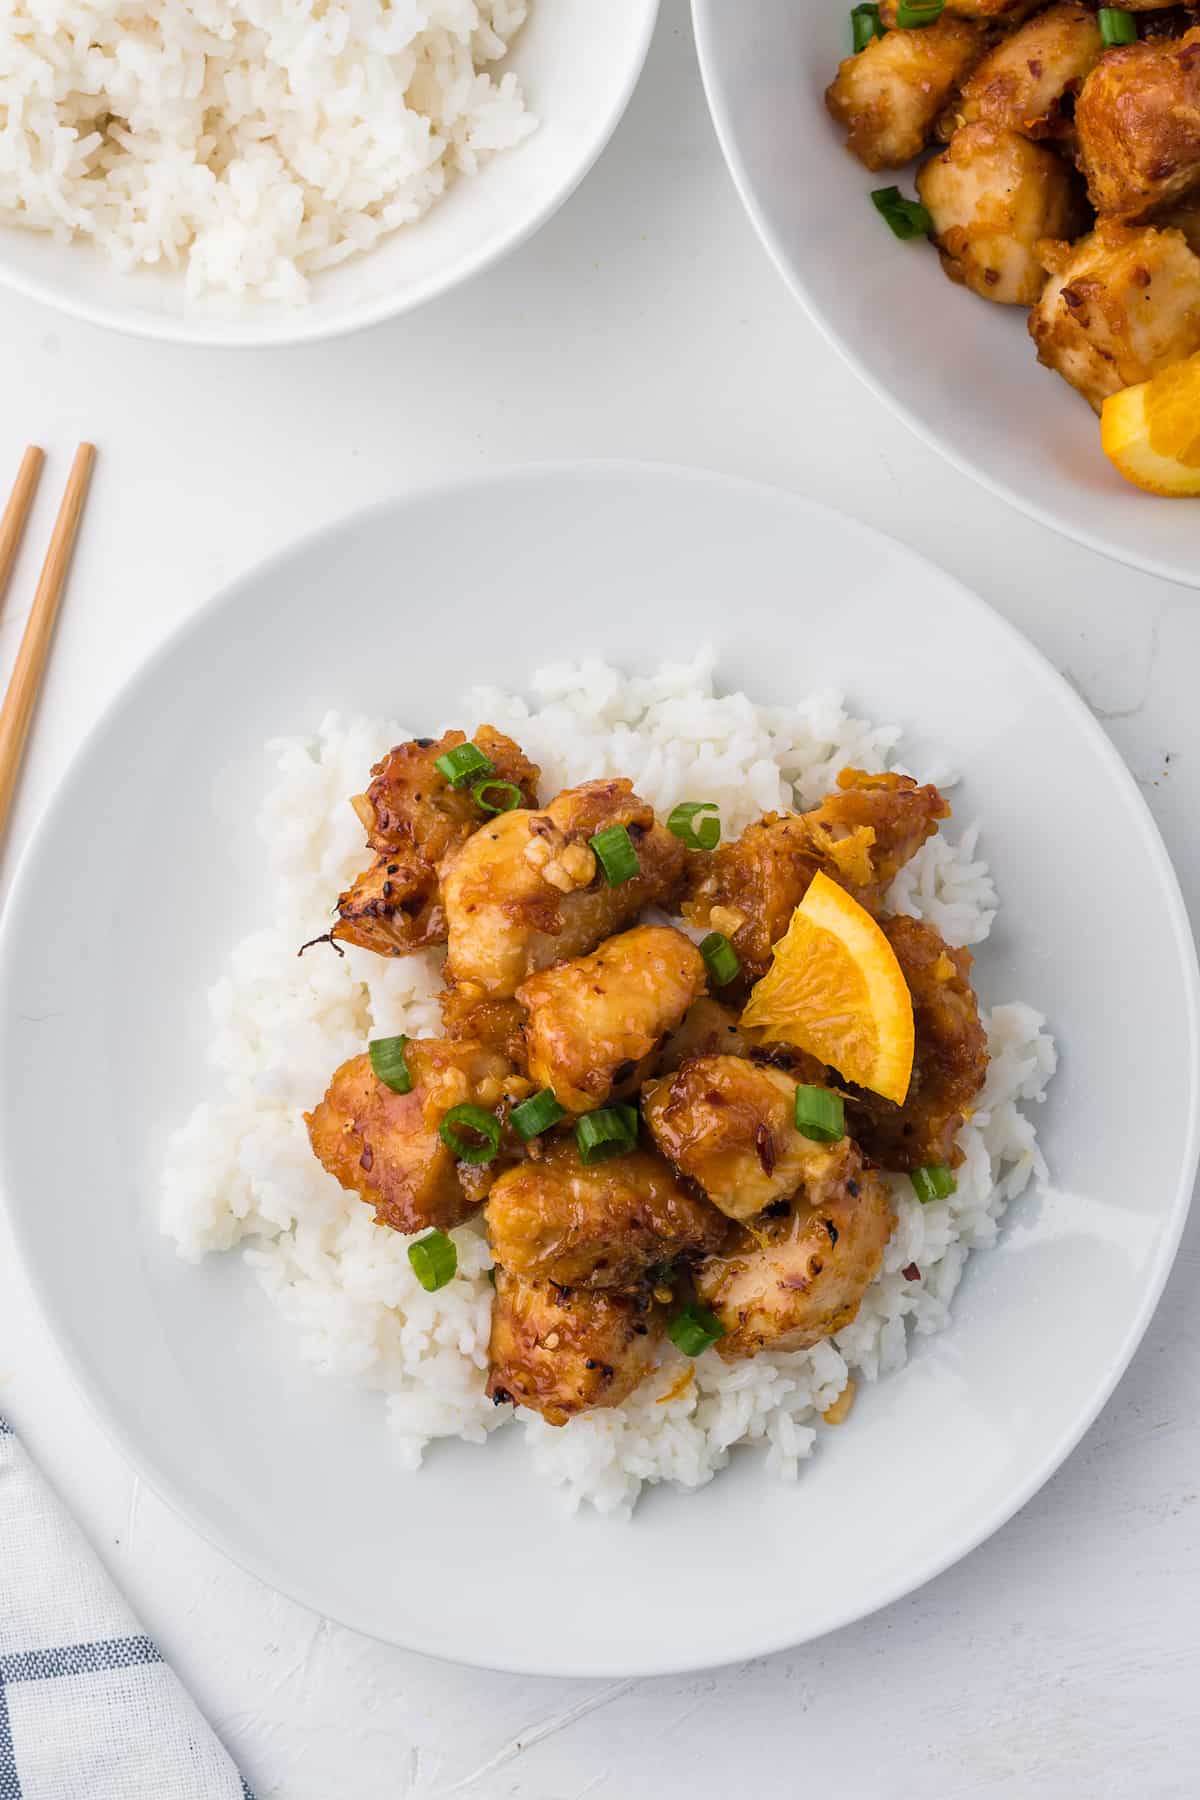 An appetizing plate of orange chicken with rice, prepared using an air fryer.